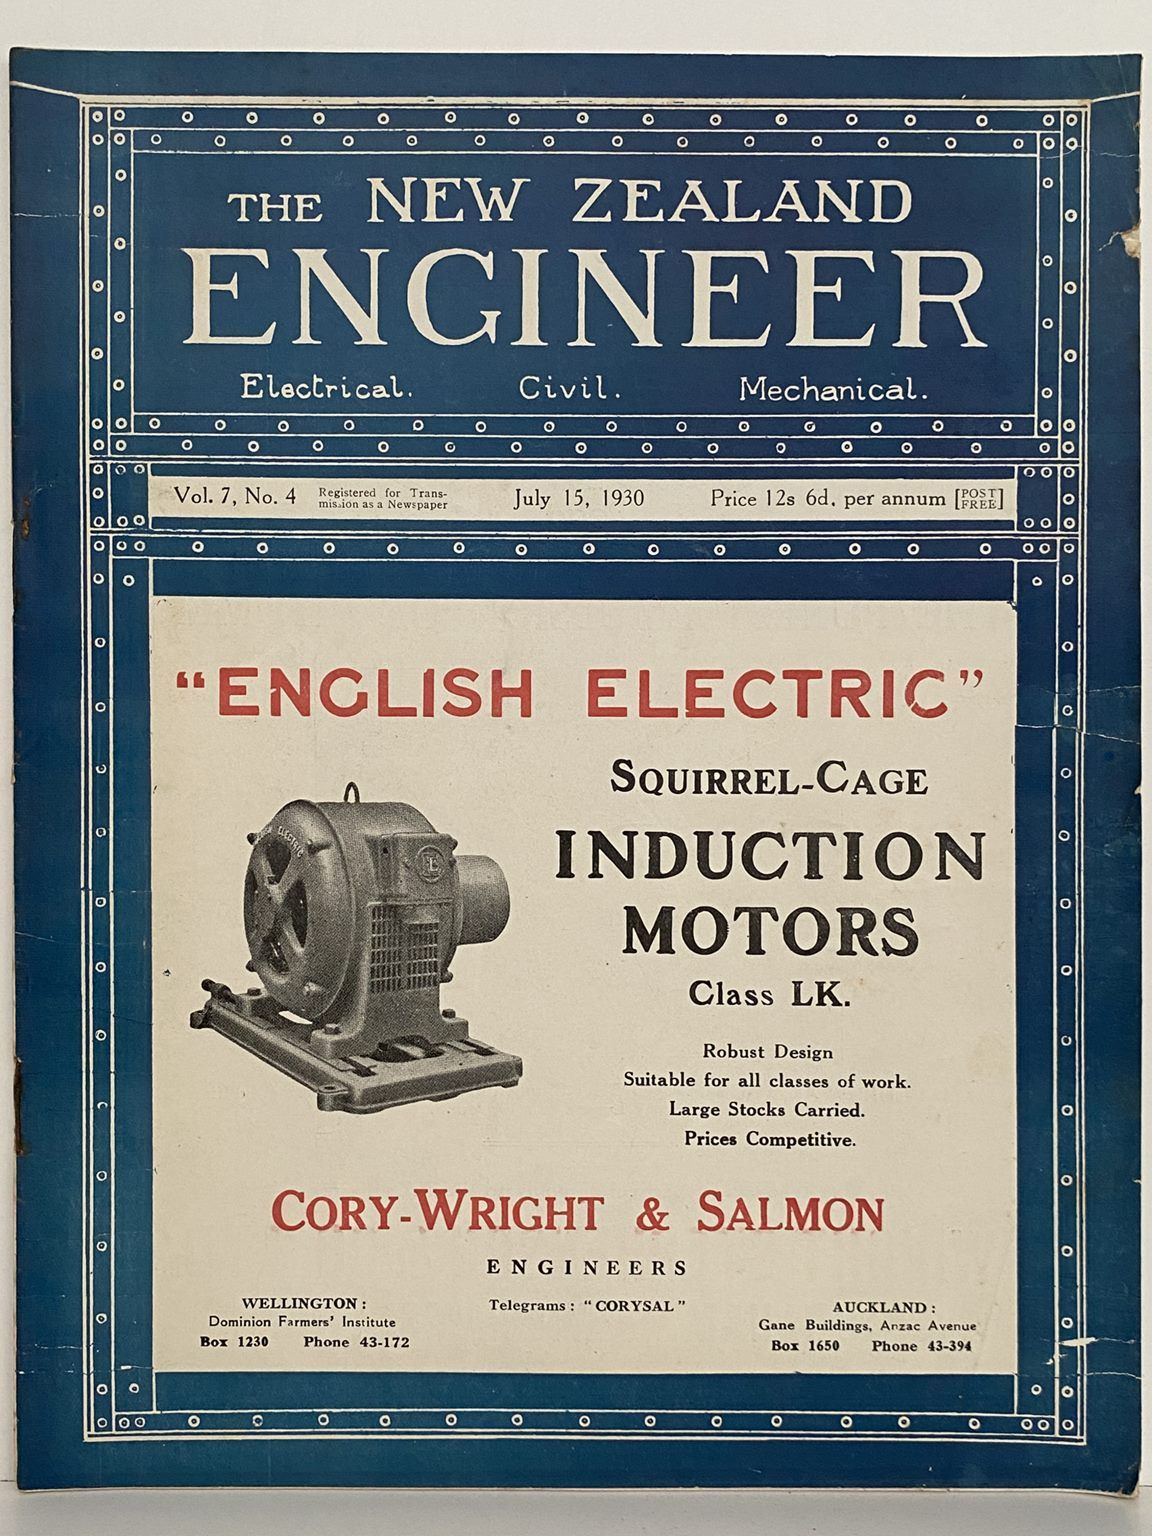 OLD MAGAZINE: The New Zealand Engineer Vol. 7, No. 4 - 15 July 1930